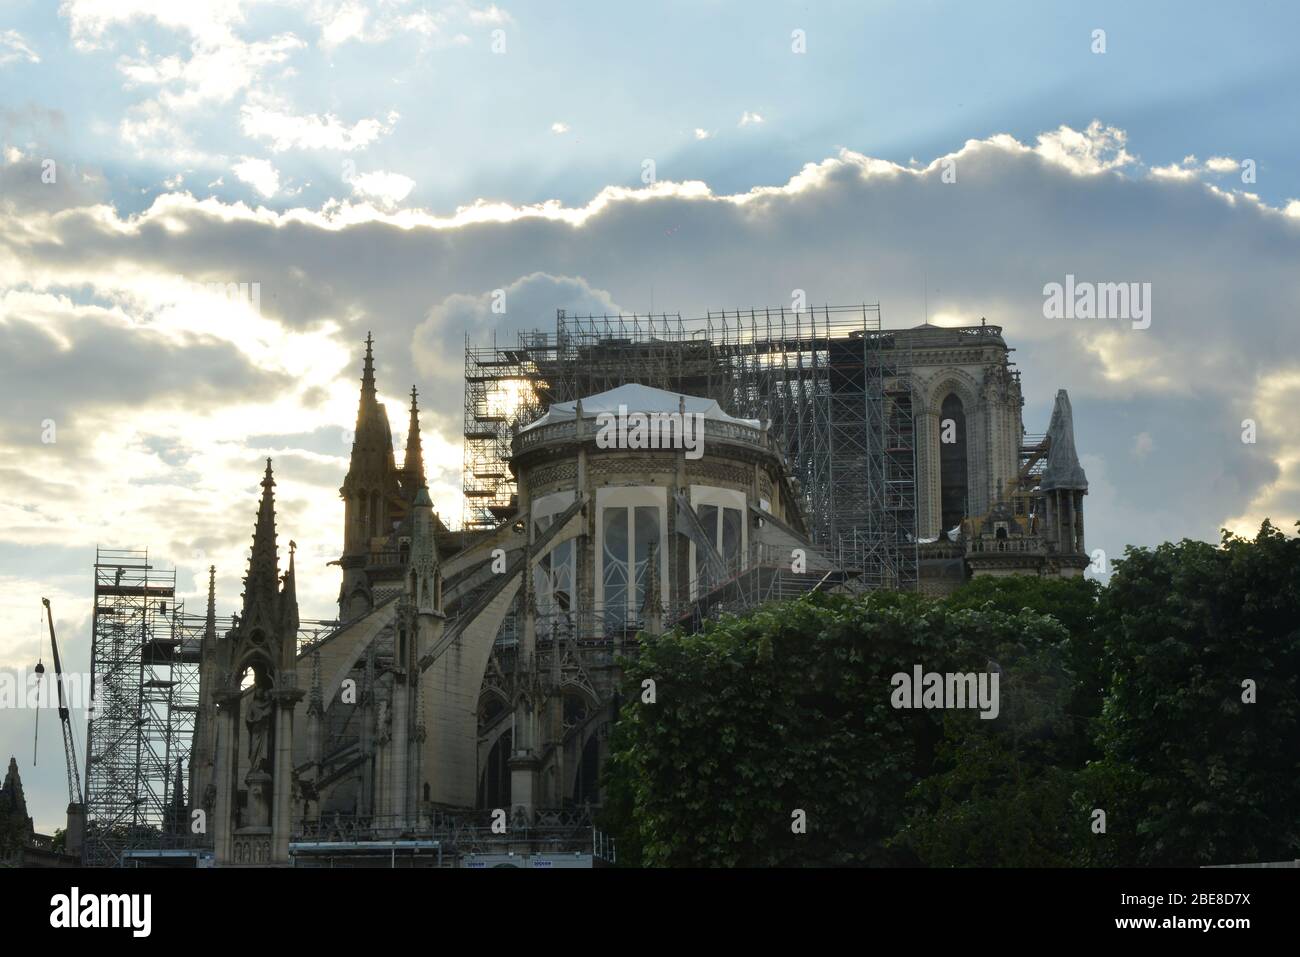 Notre-dame of Paris after the drama Stock Photo